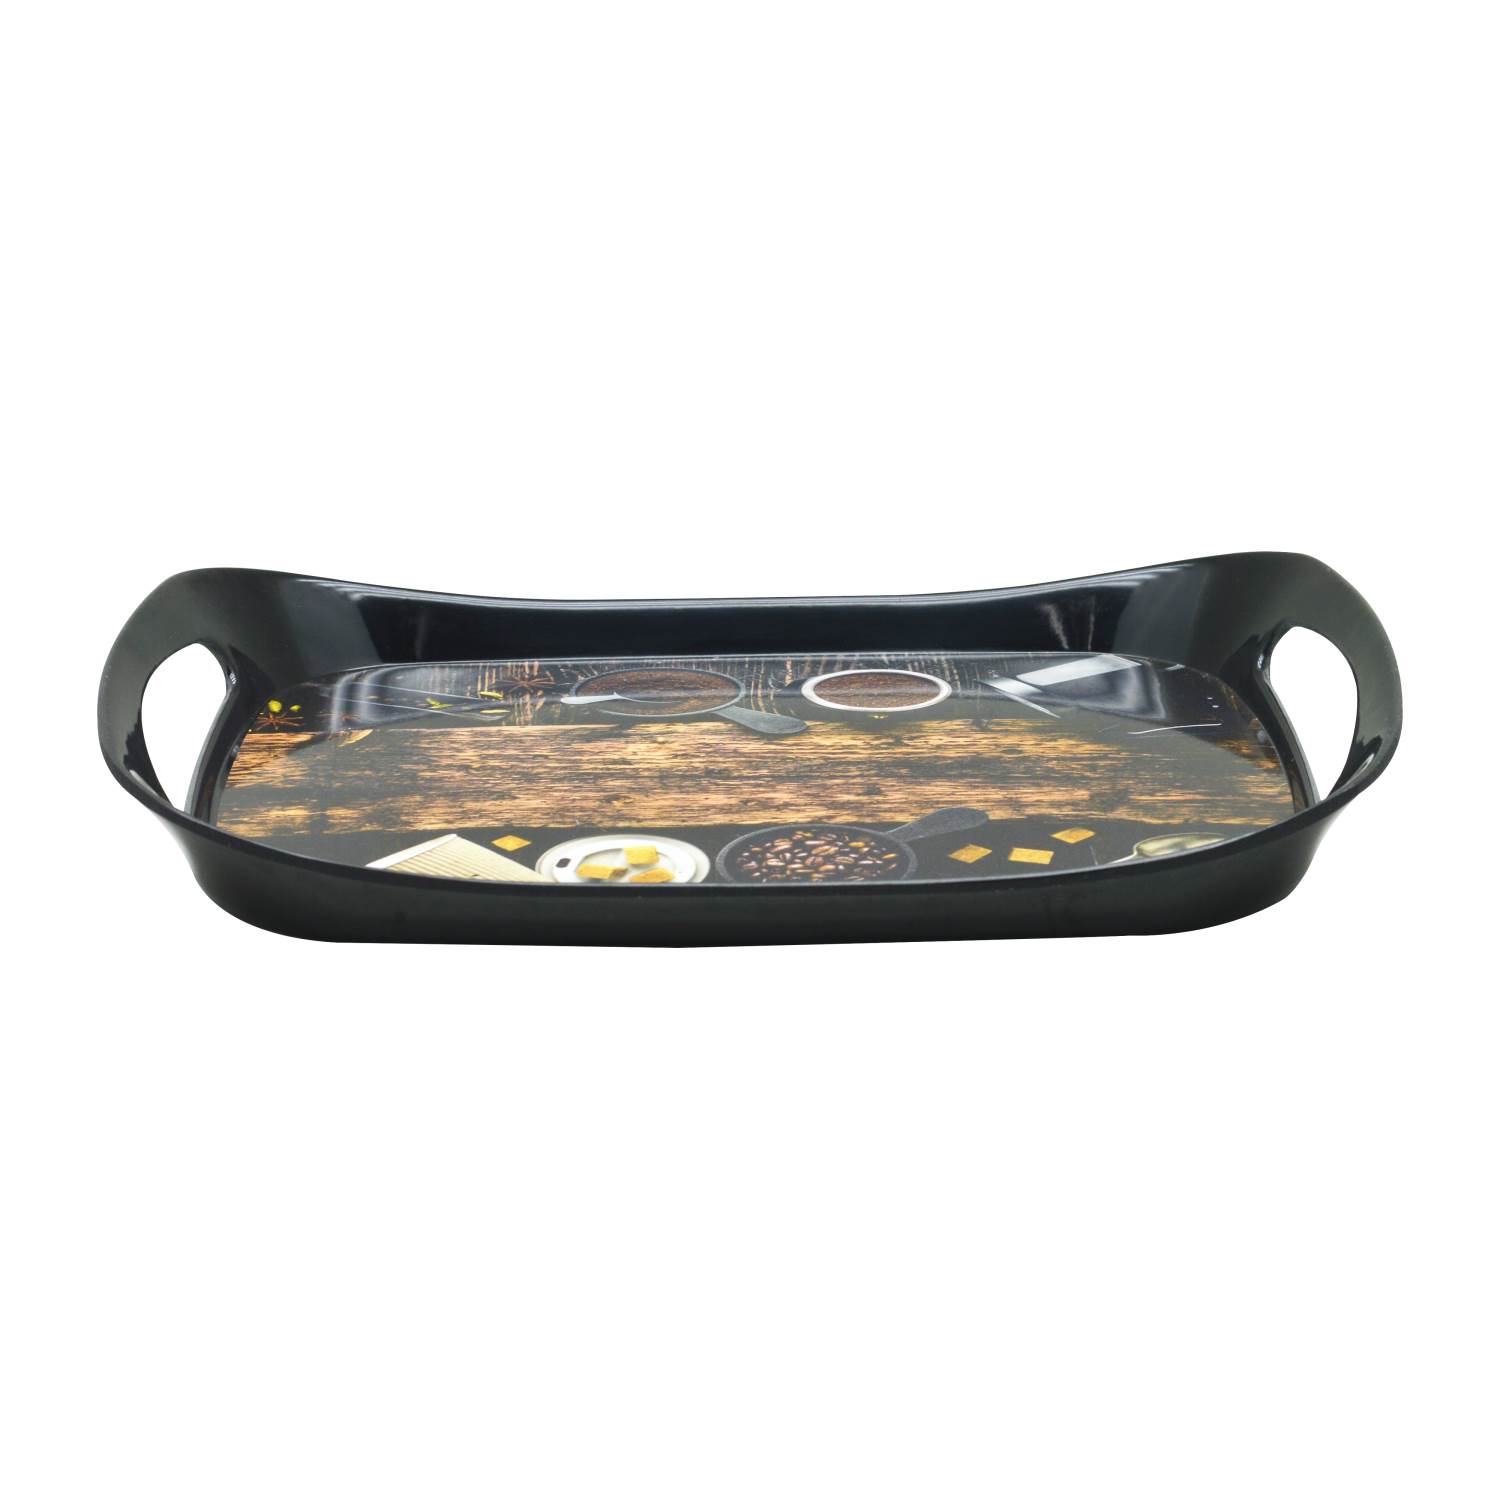 Rk Comfort Tray Small Coffee Beans, Dwt1024Cfb, 12.25" X 9"